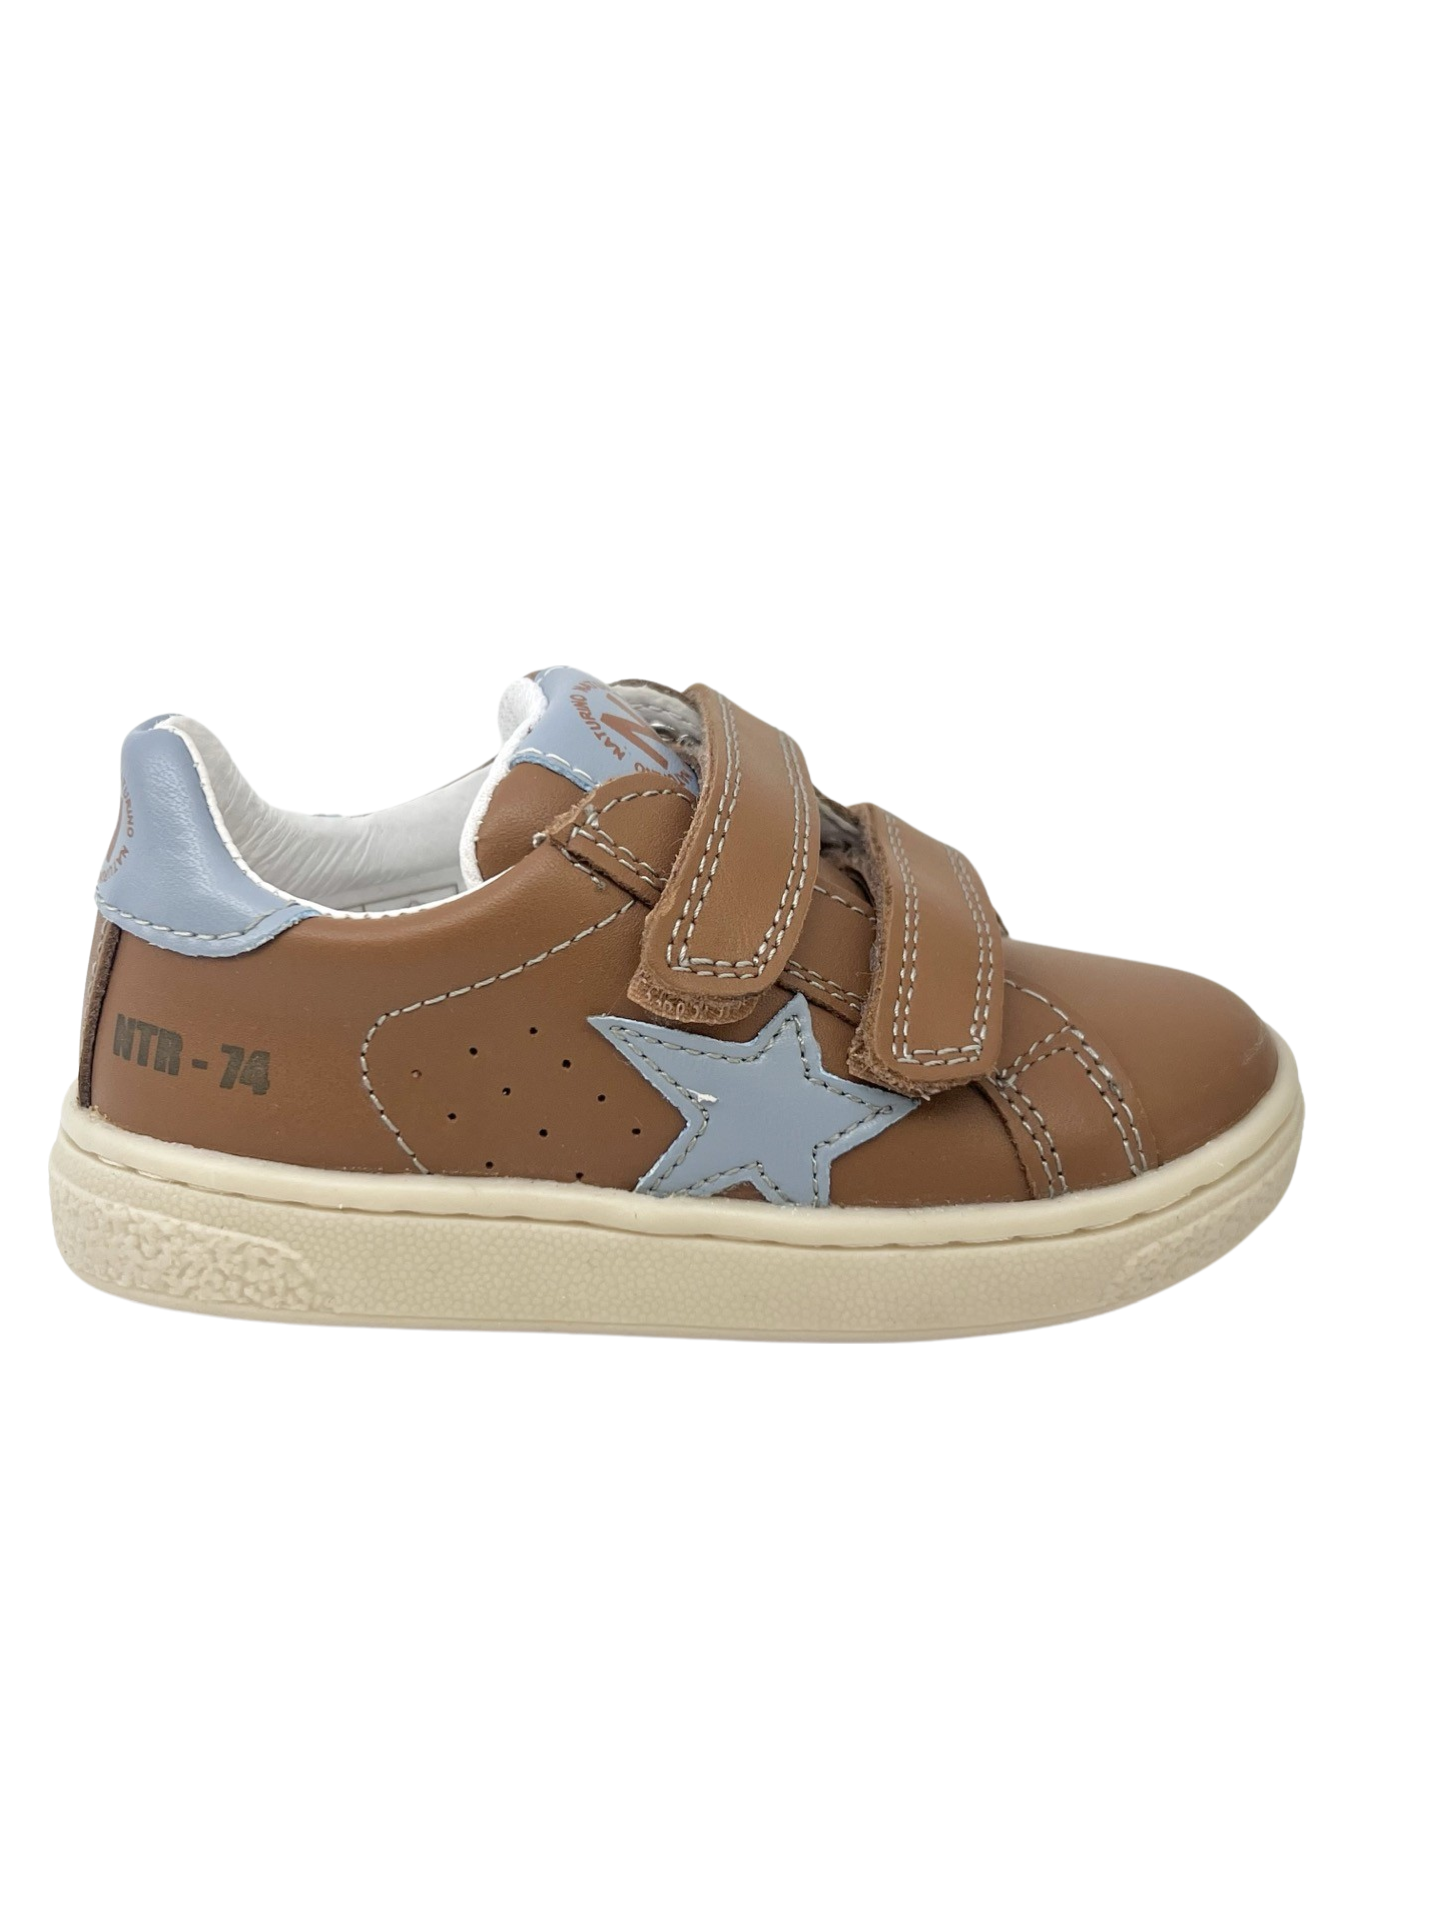 Naturino Luggage Double Velcro Sneaker With Blue Star - Pinn